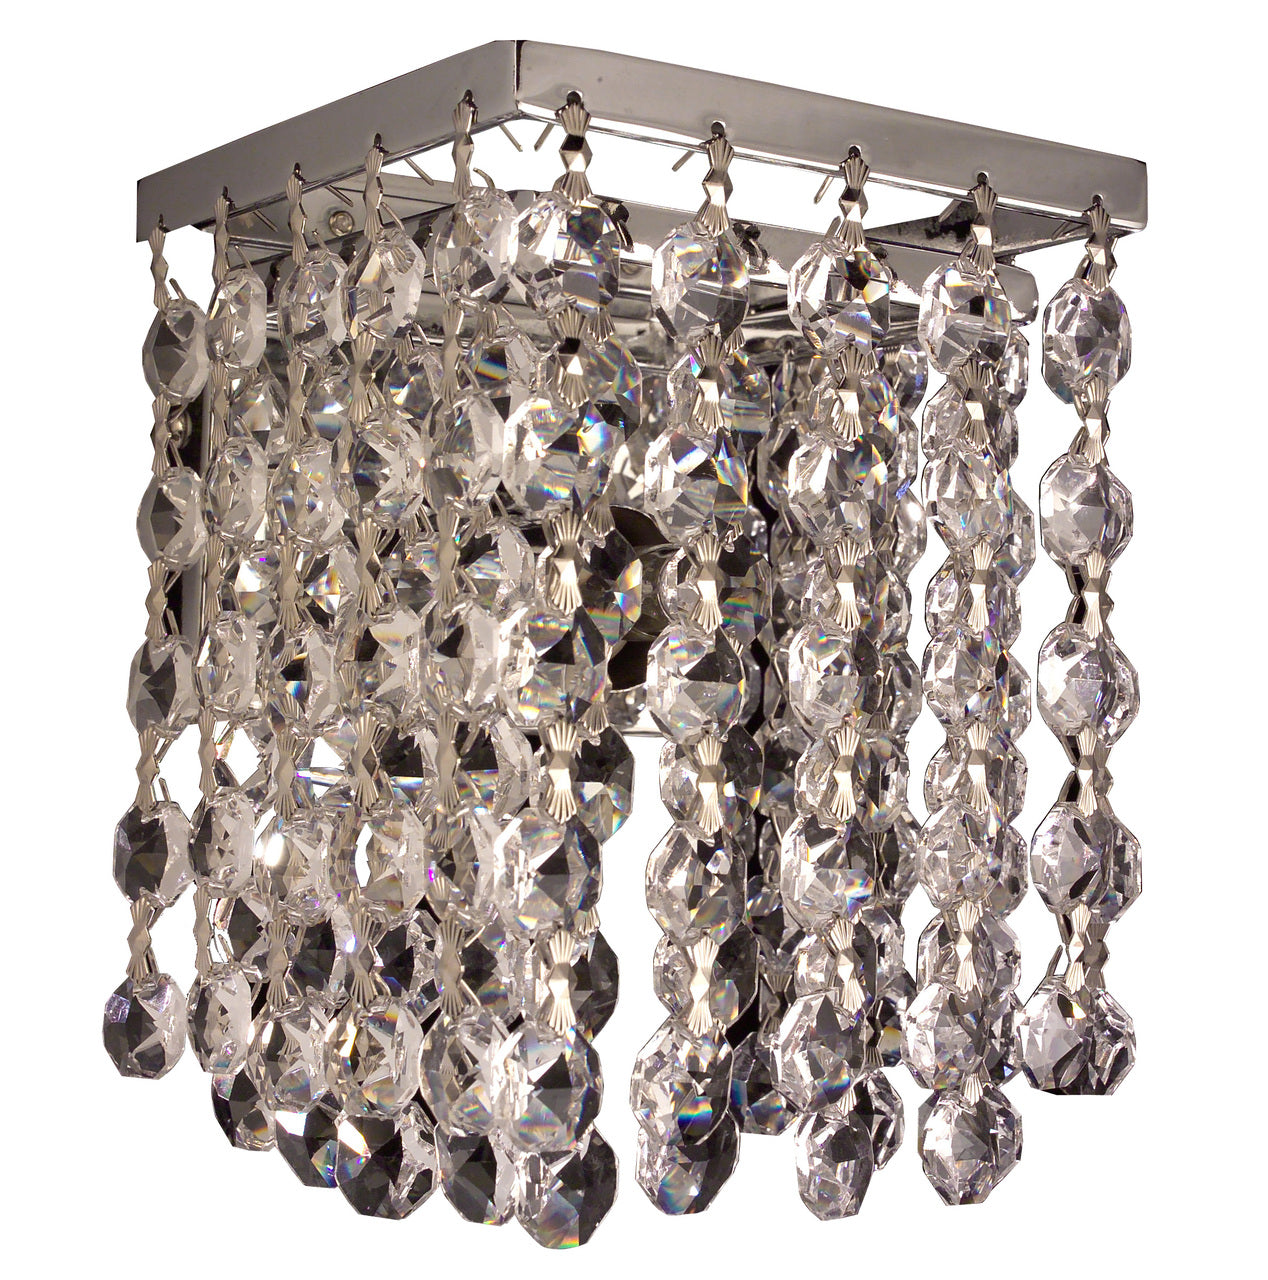 Classic Lighting 16102 CP Bedazzle Crystal Wall Sconce in Chrome